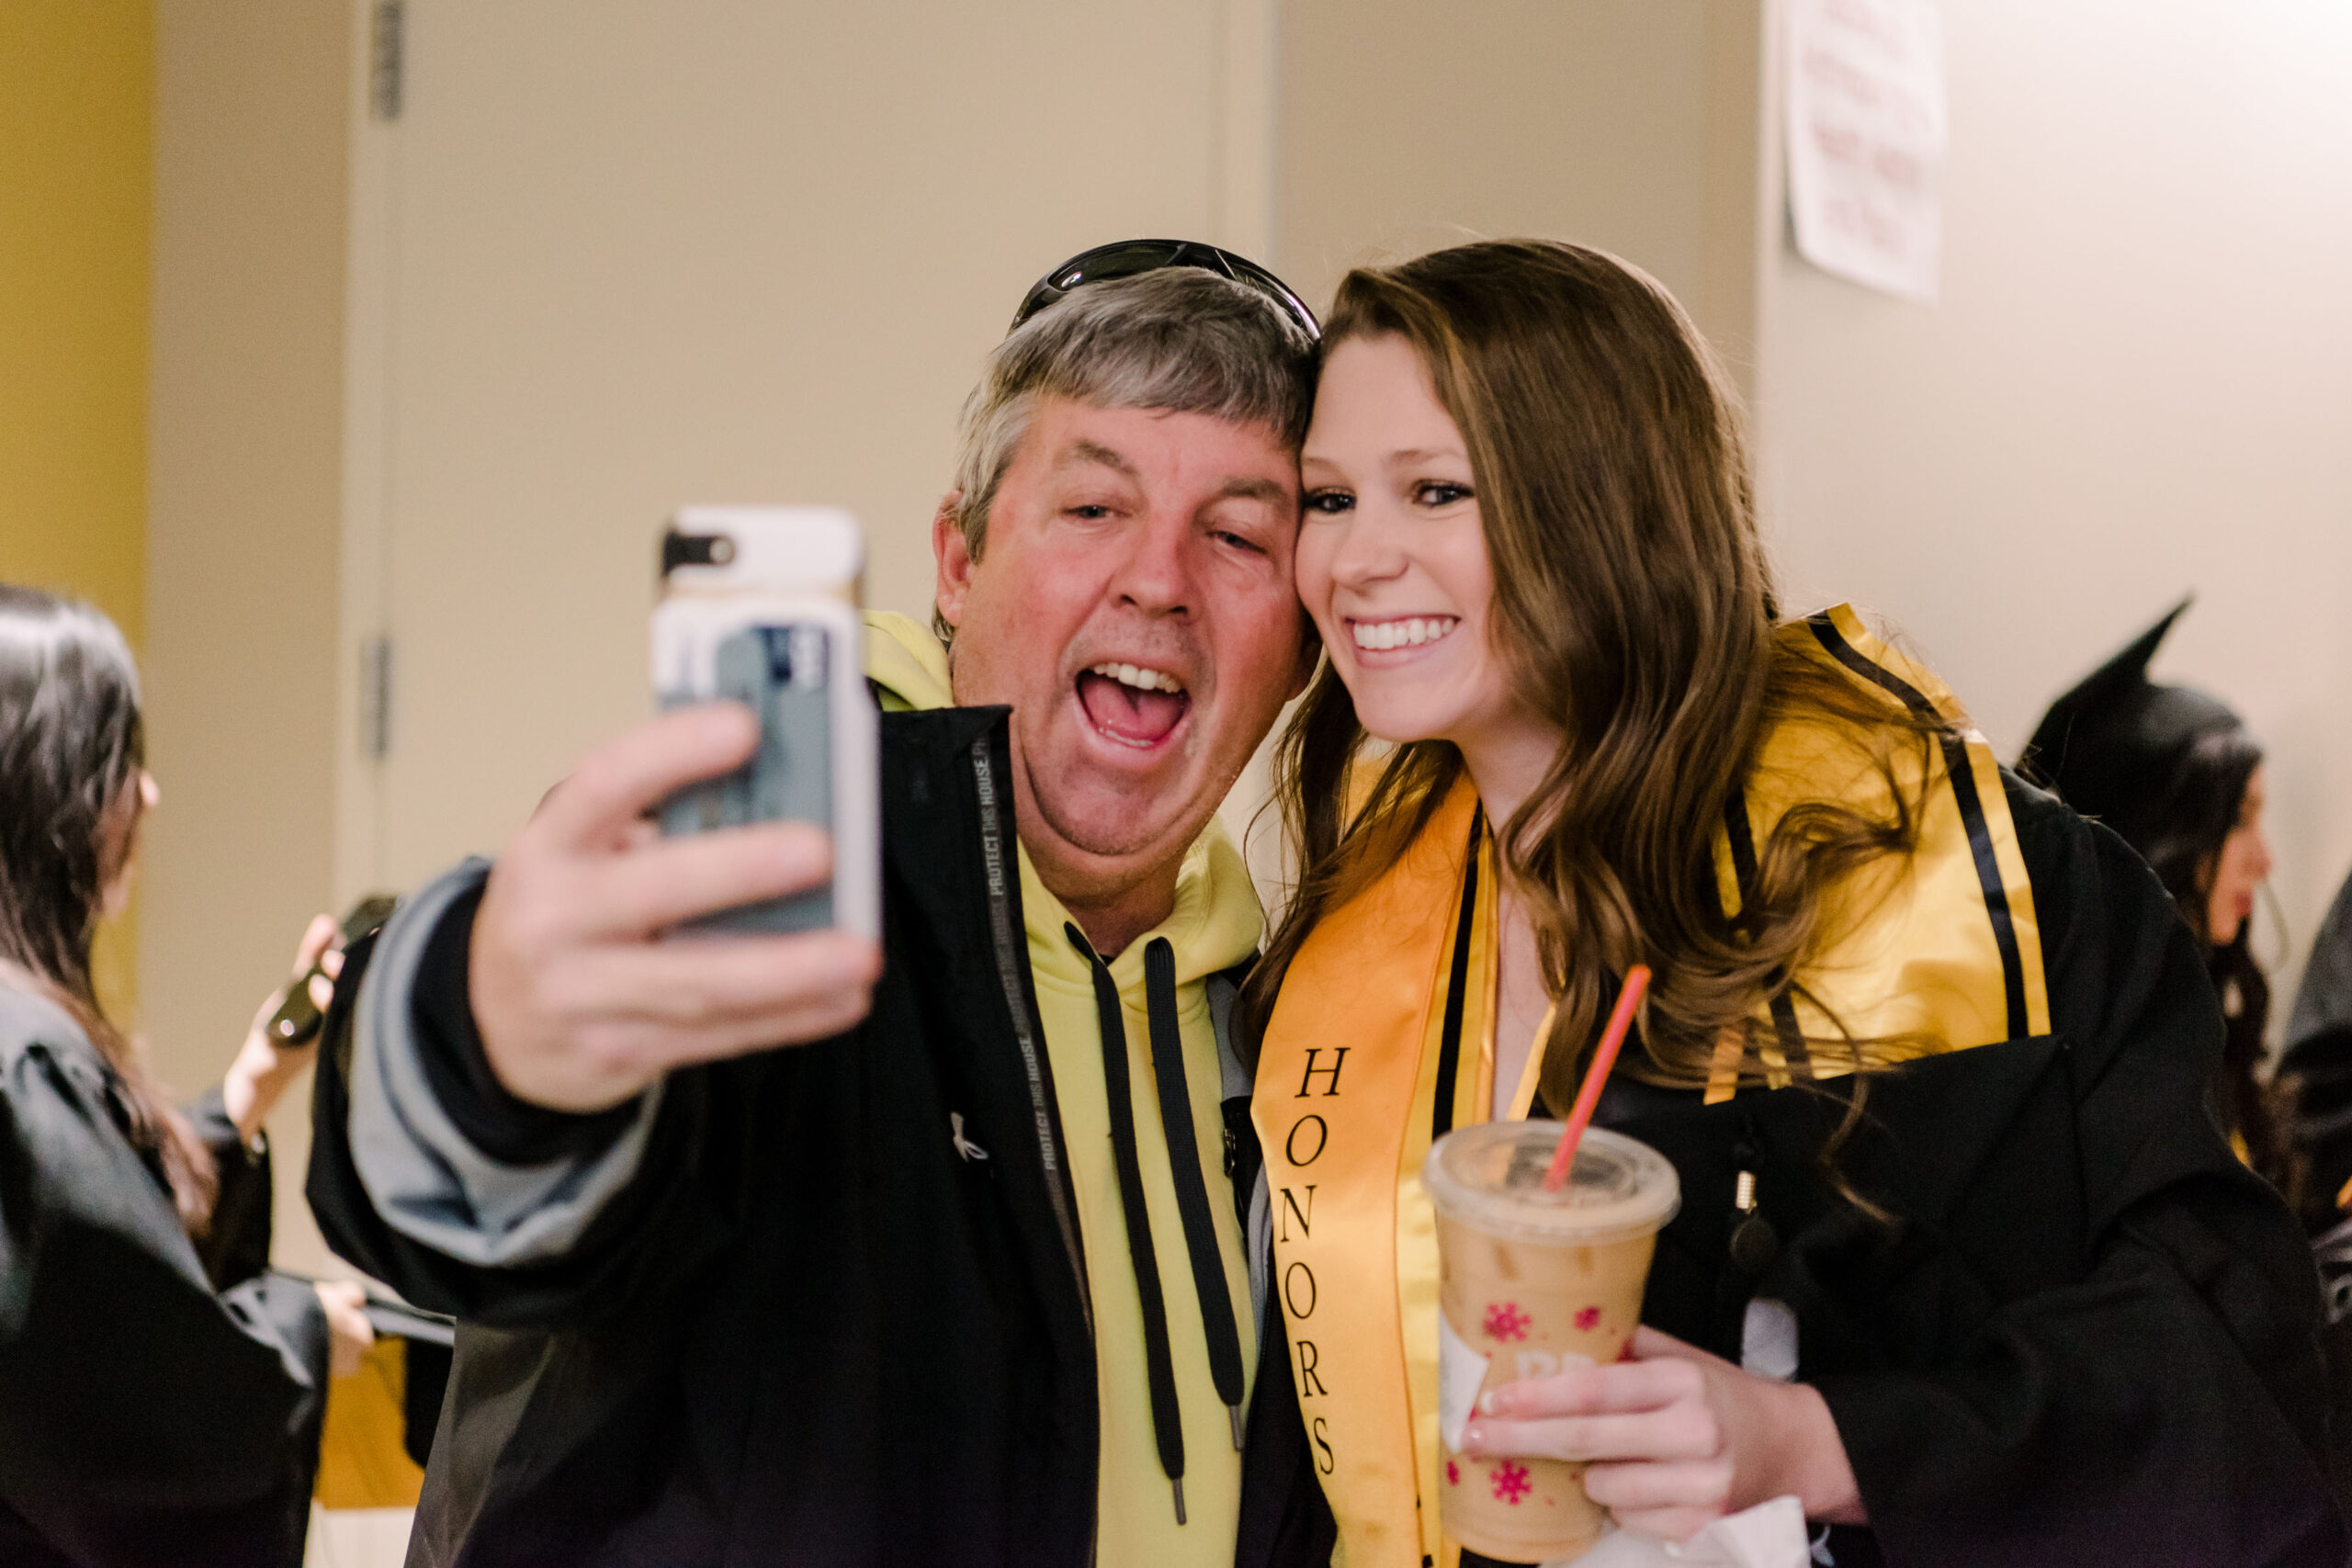 man and graduating student take a selfie together